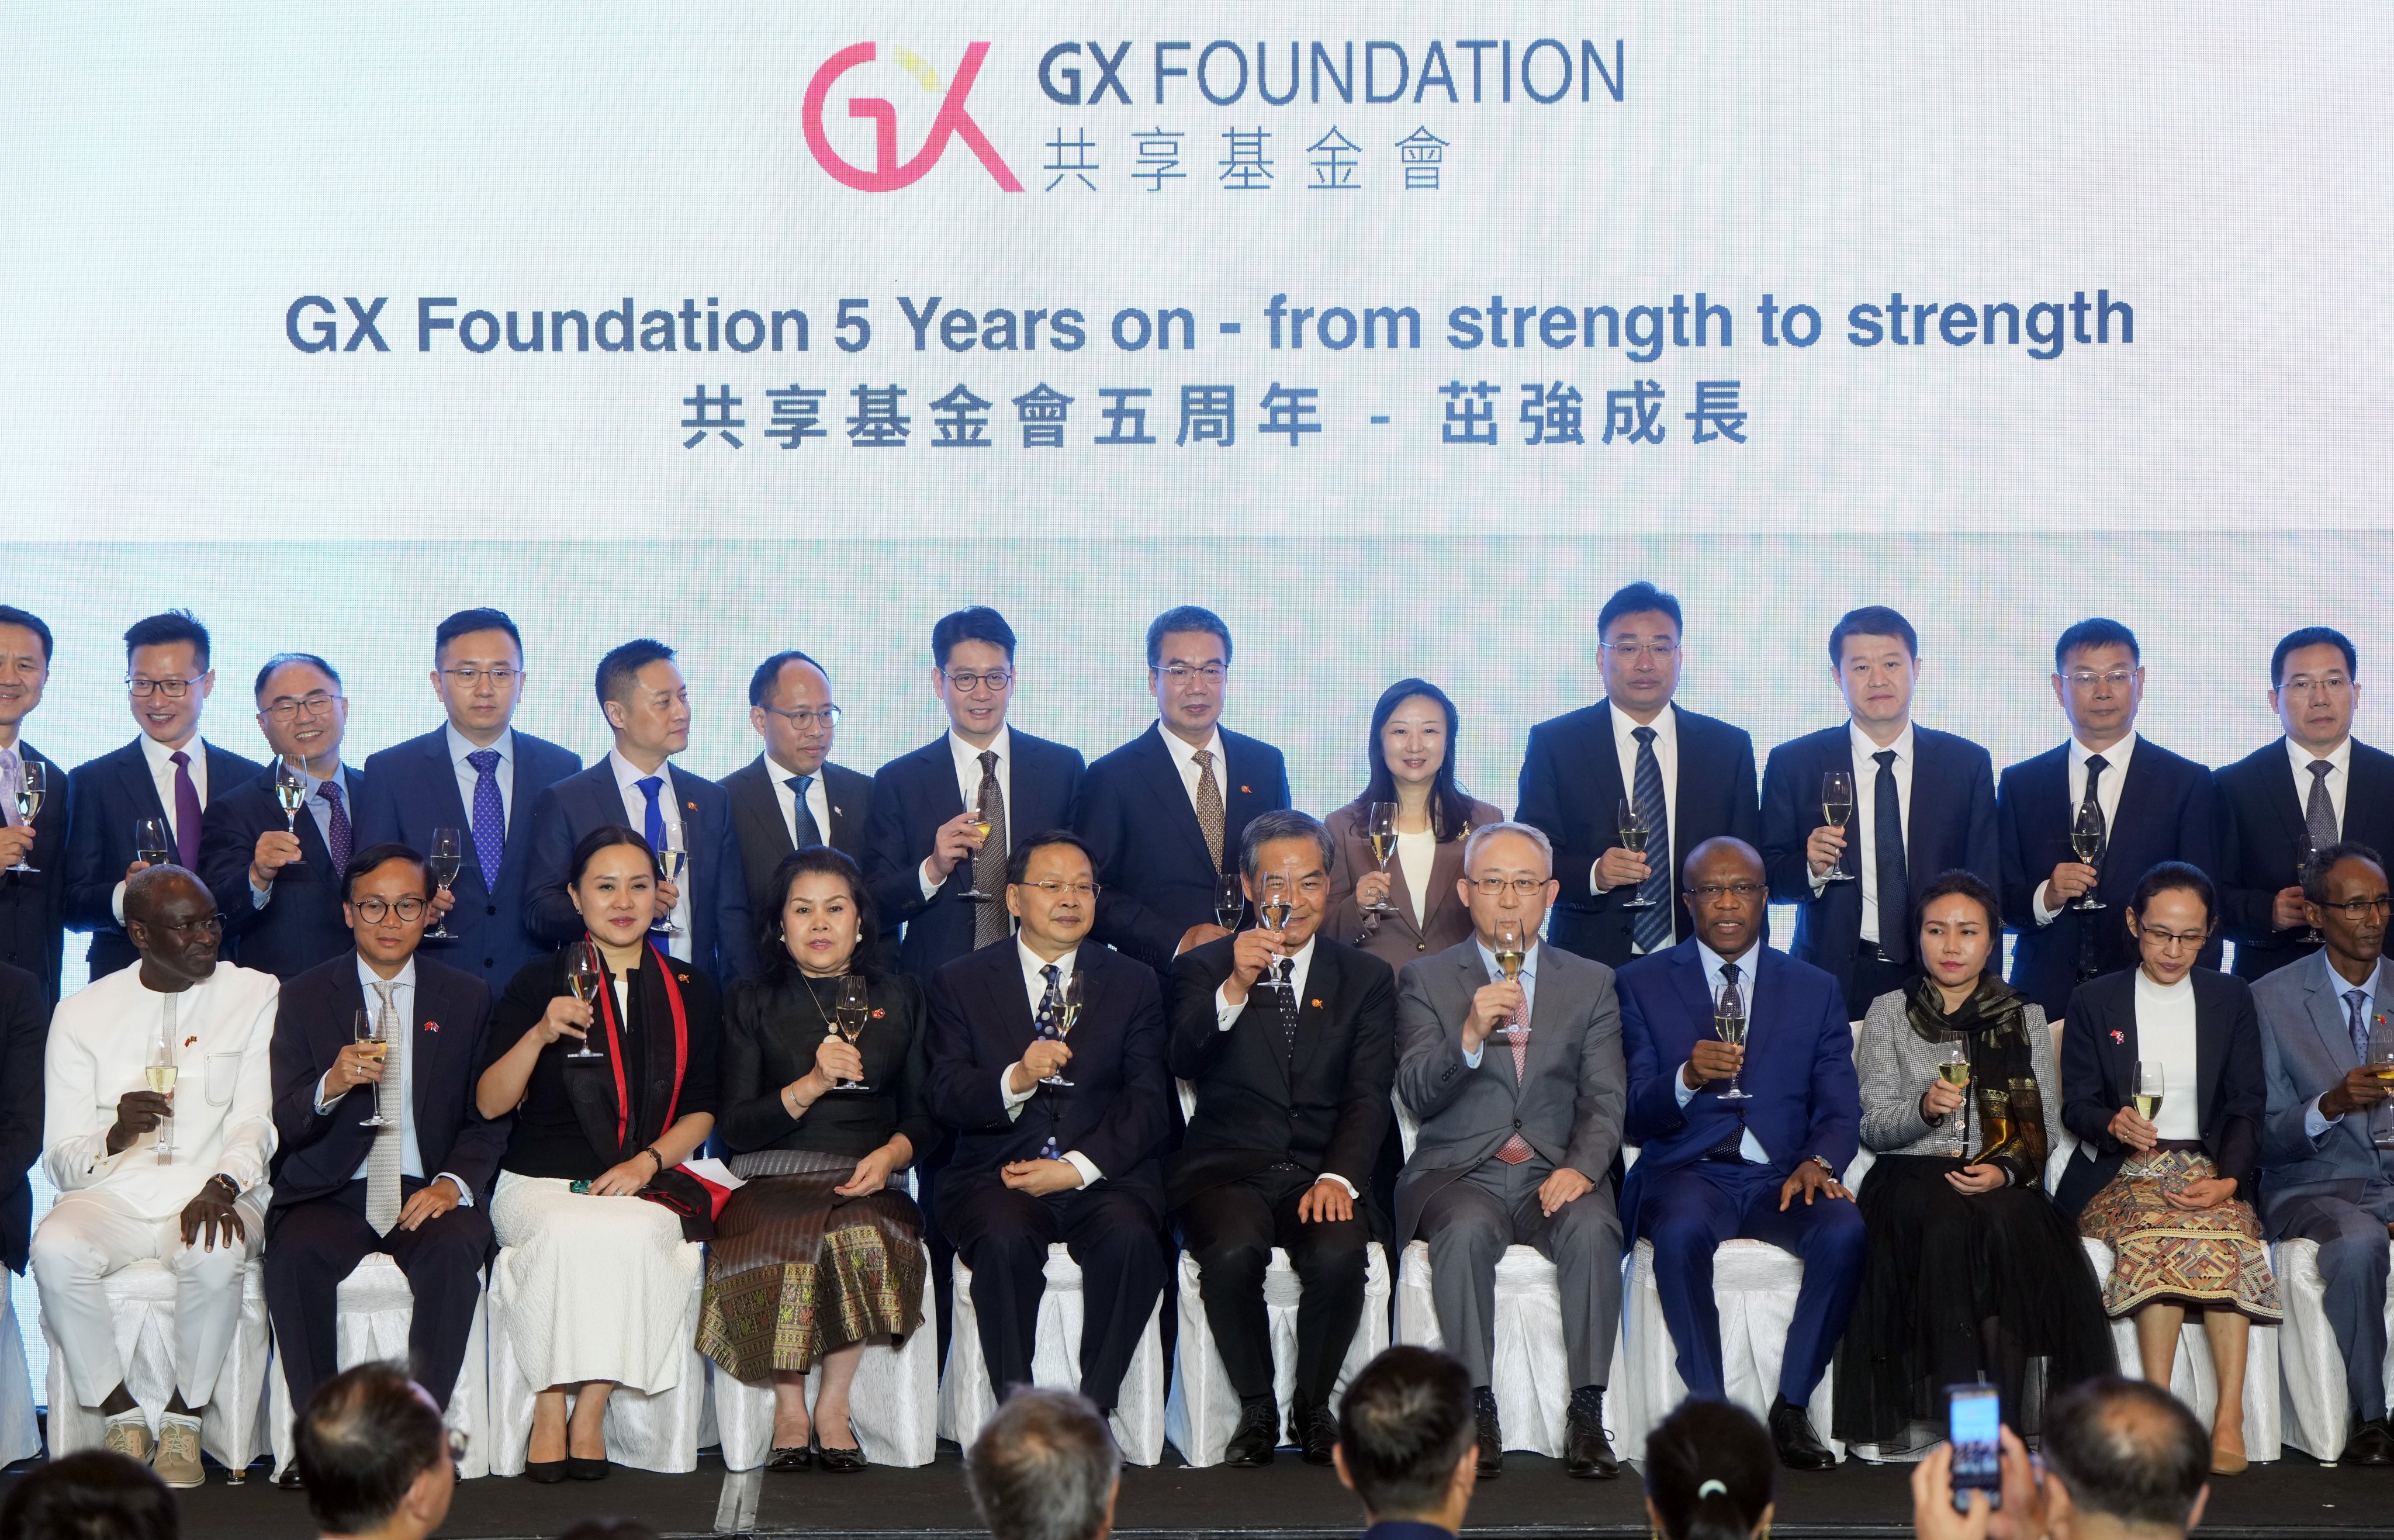 The GX Foundation celebrates its fifth anniversary. The organisation aims to provide 37,500 free cataract operations by 2027. Photo: Sam Tsang